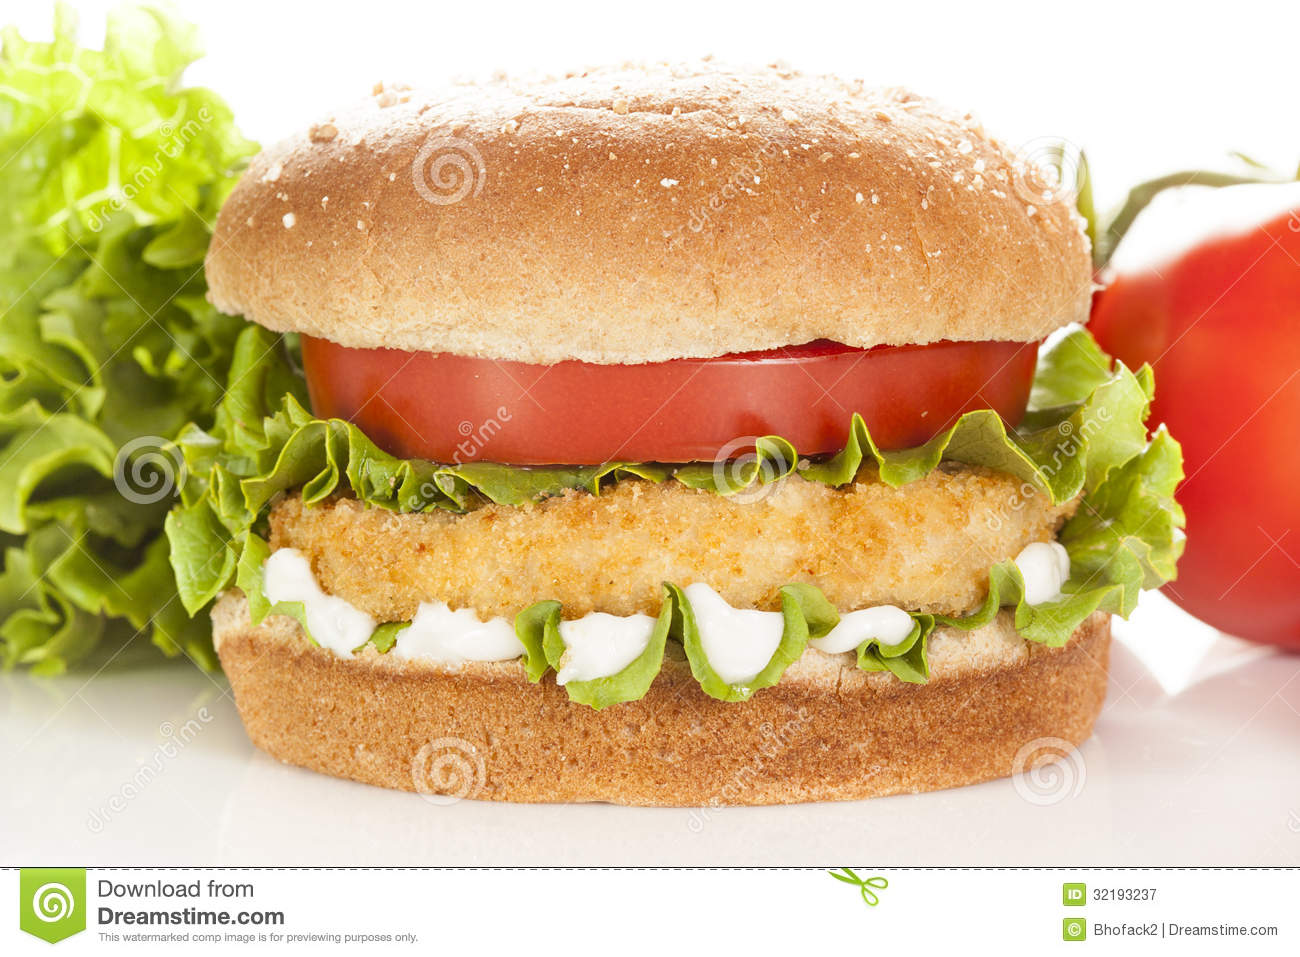 Breaded Chicken Patty Sandwich On A Bun Royalty Free Stock Photography    